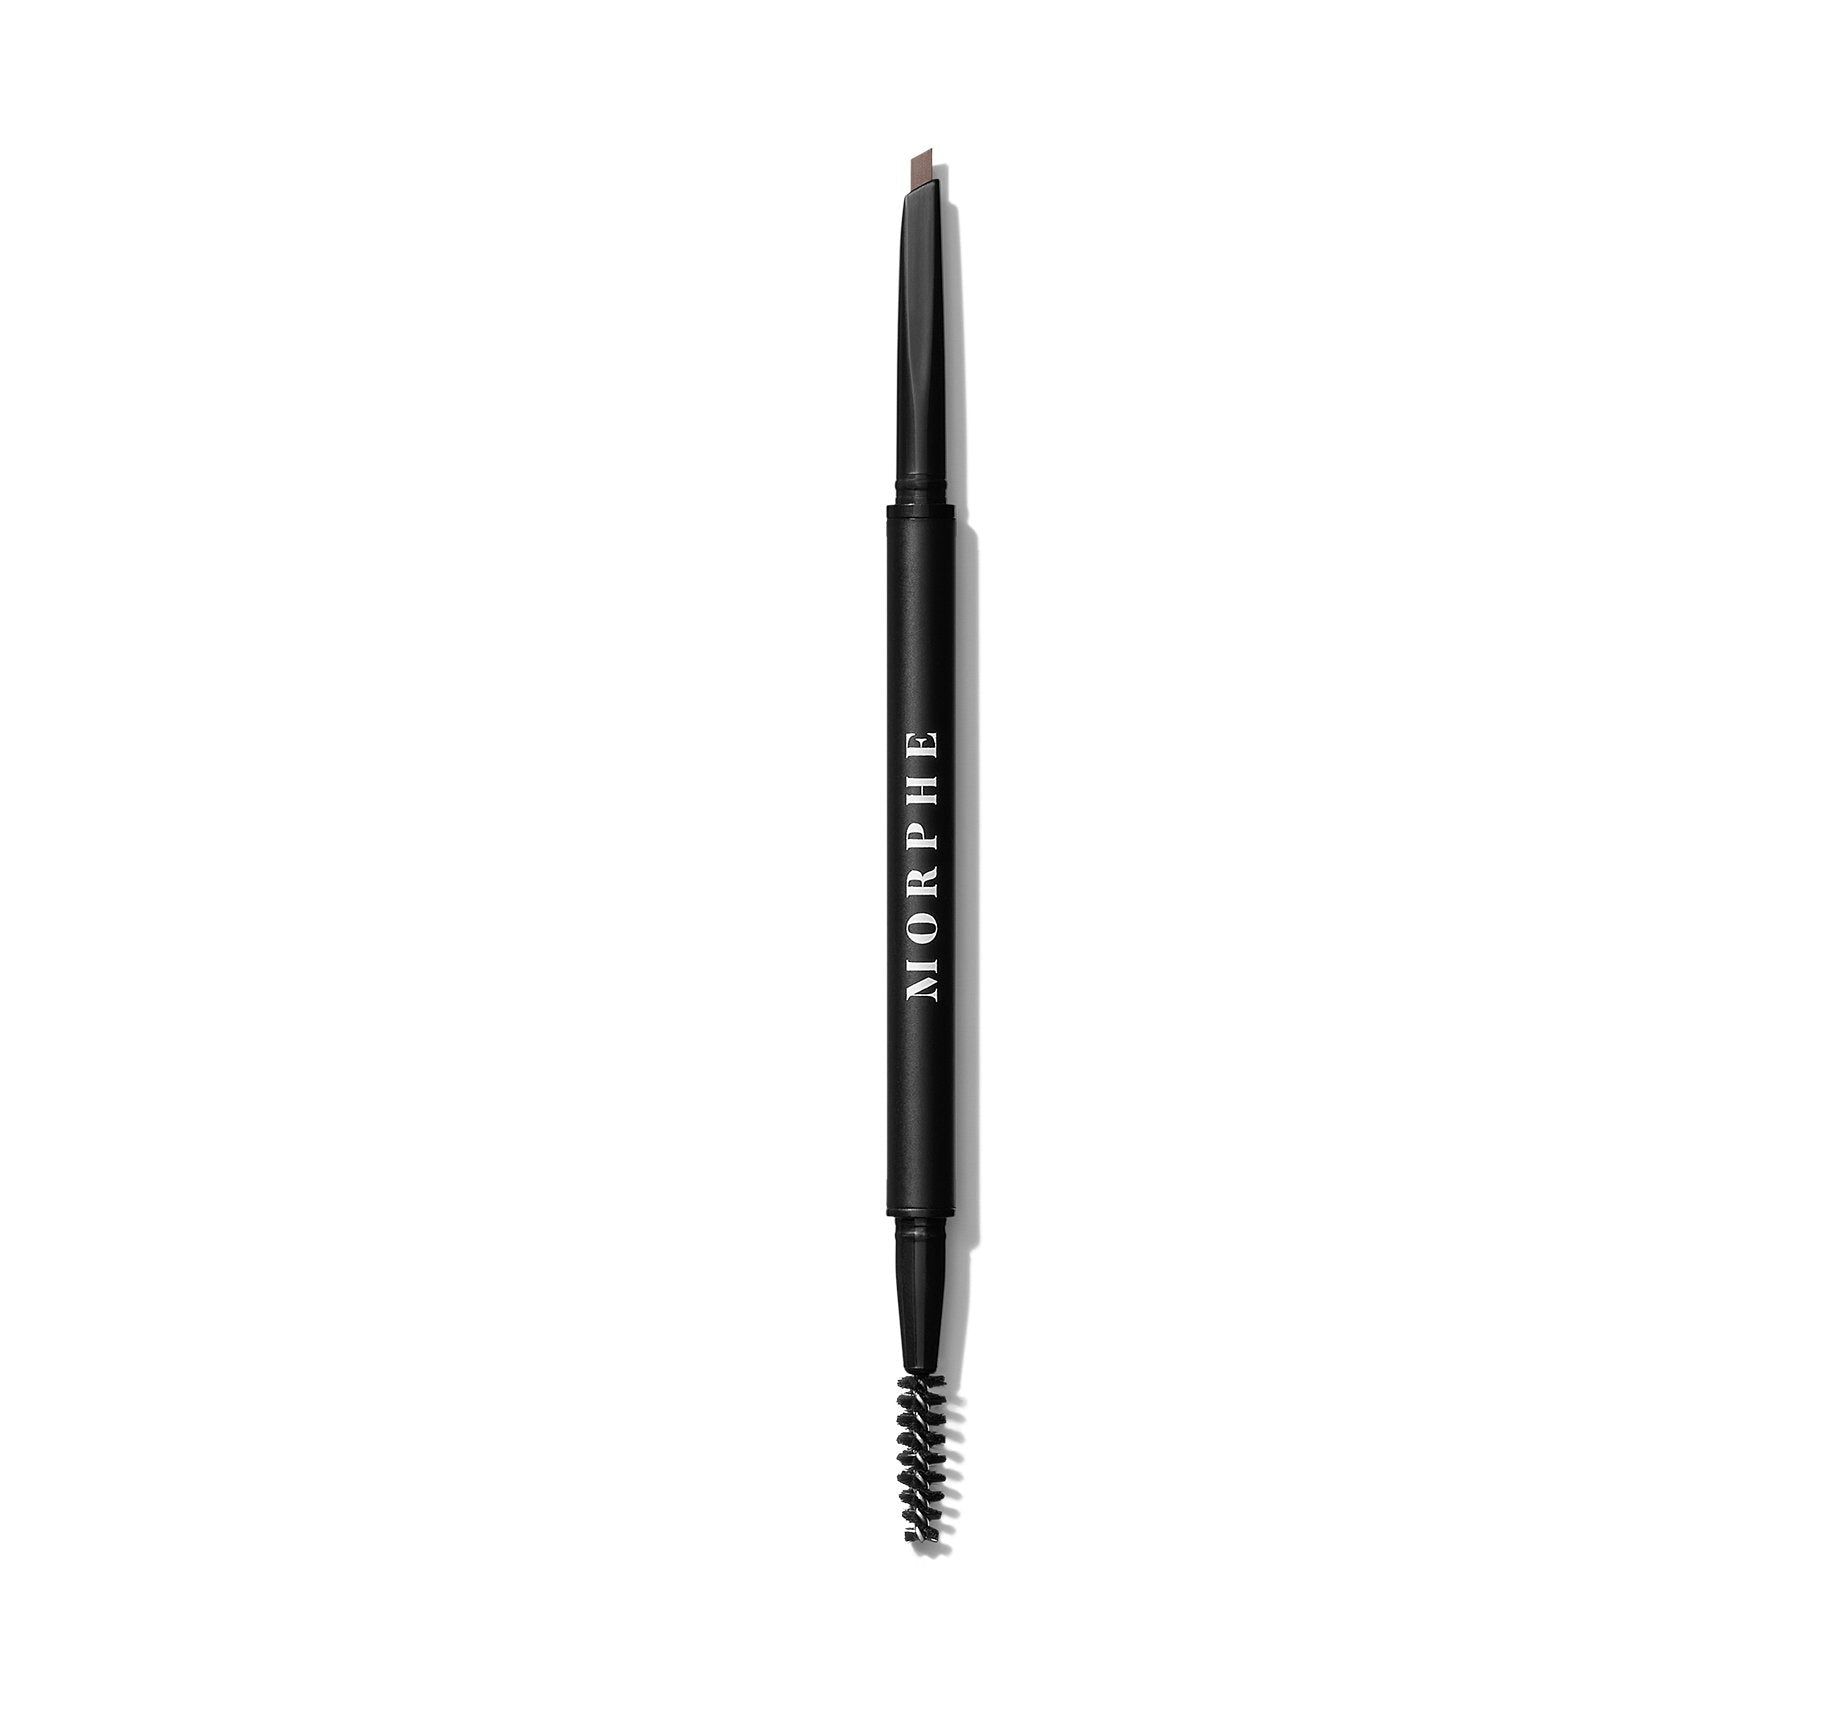 Definer Dual-Ended Brow Pencil & Spoolie - Chocolate Mousse - Image 1